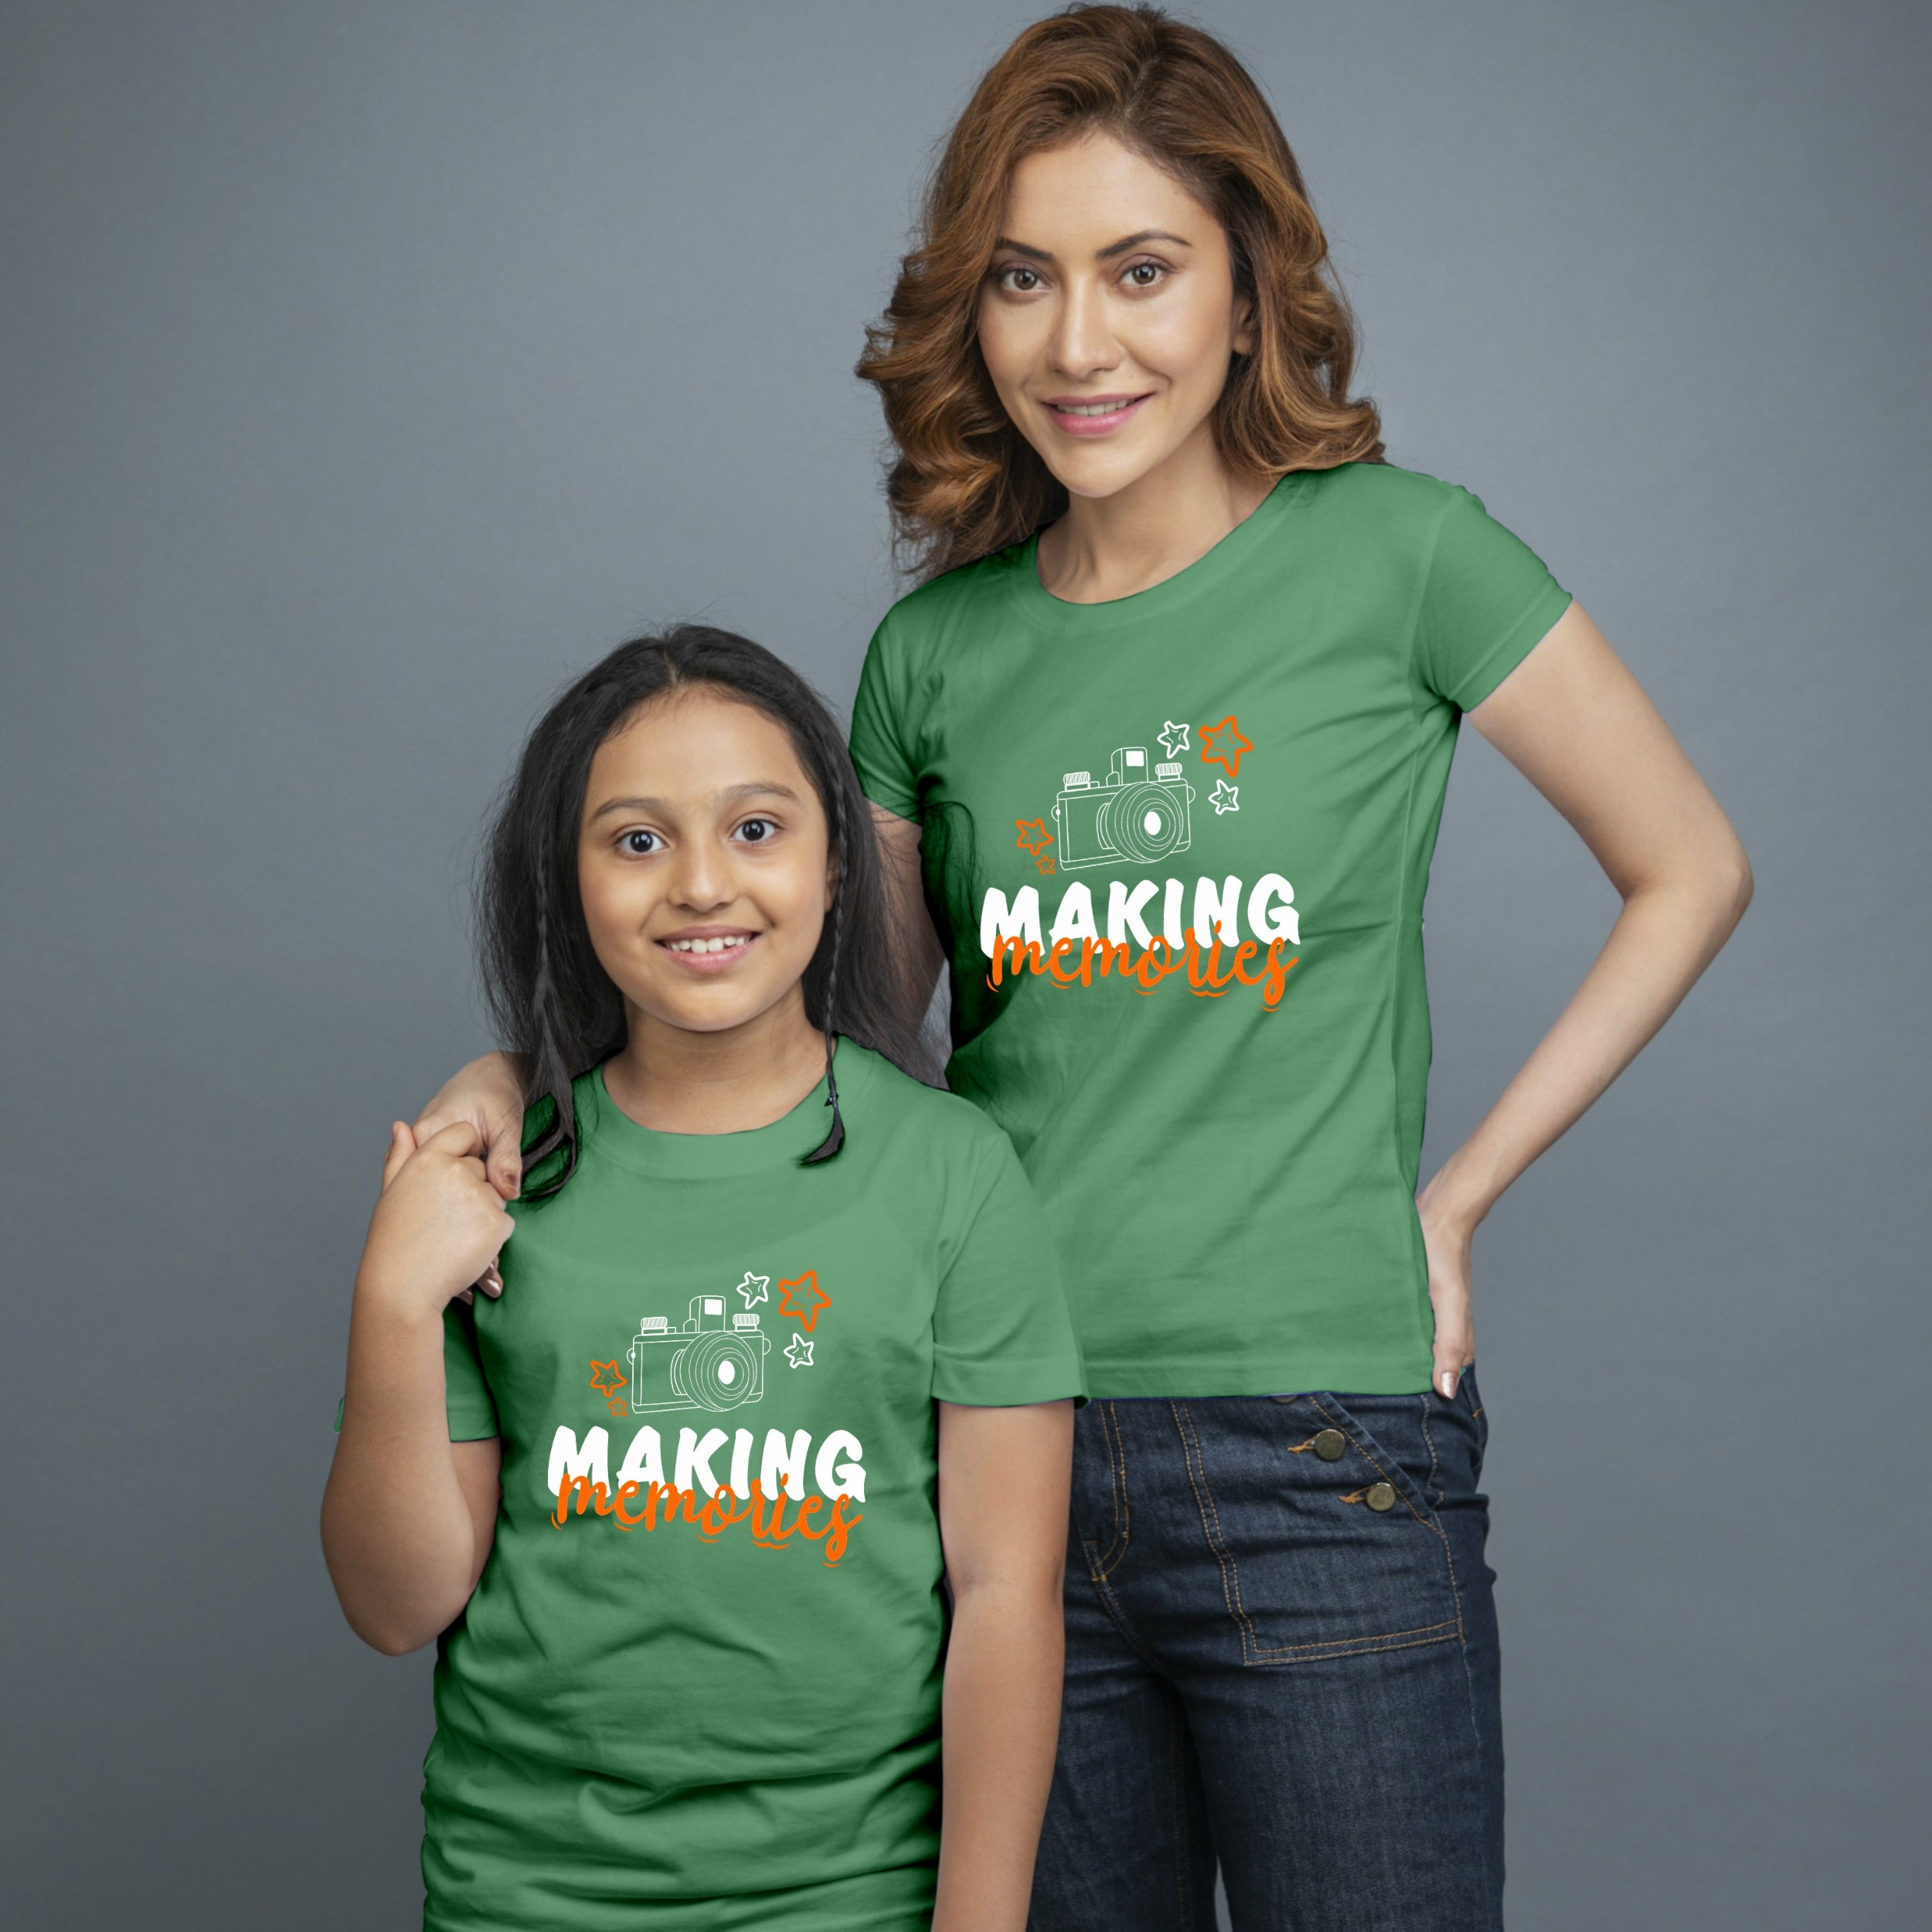 Family of 2 t shirt for Mom Daughter in Green Colour- Making Memories Variant